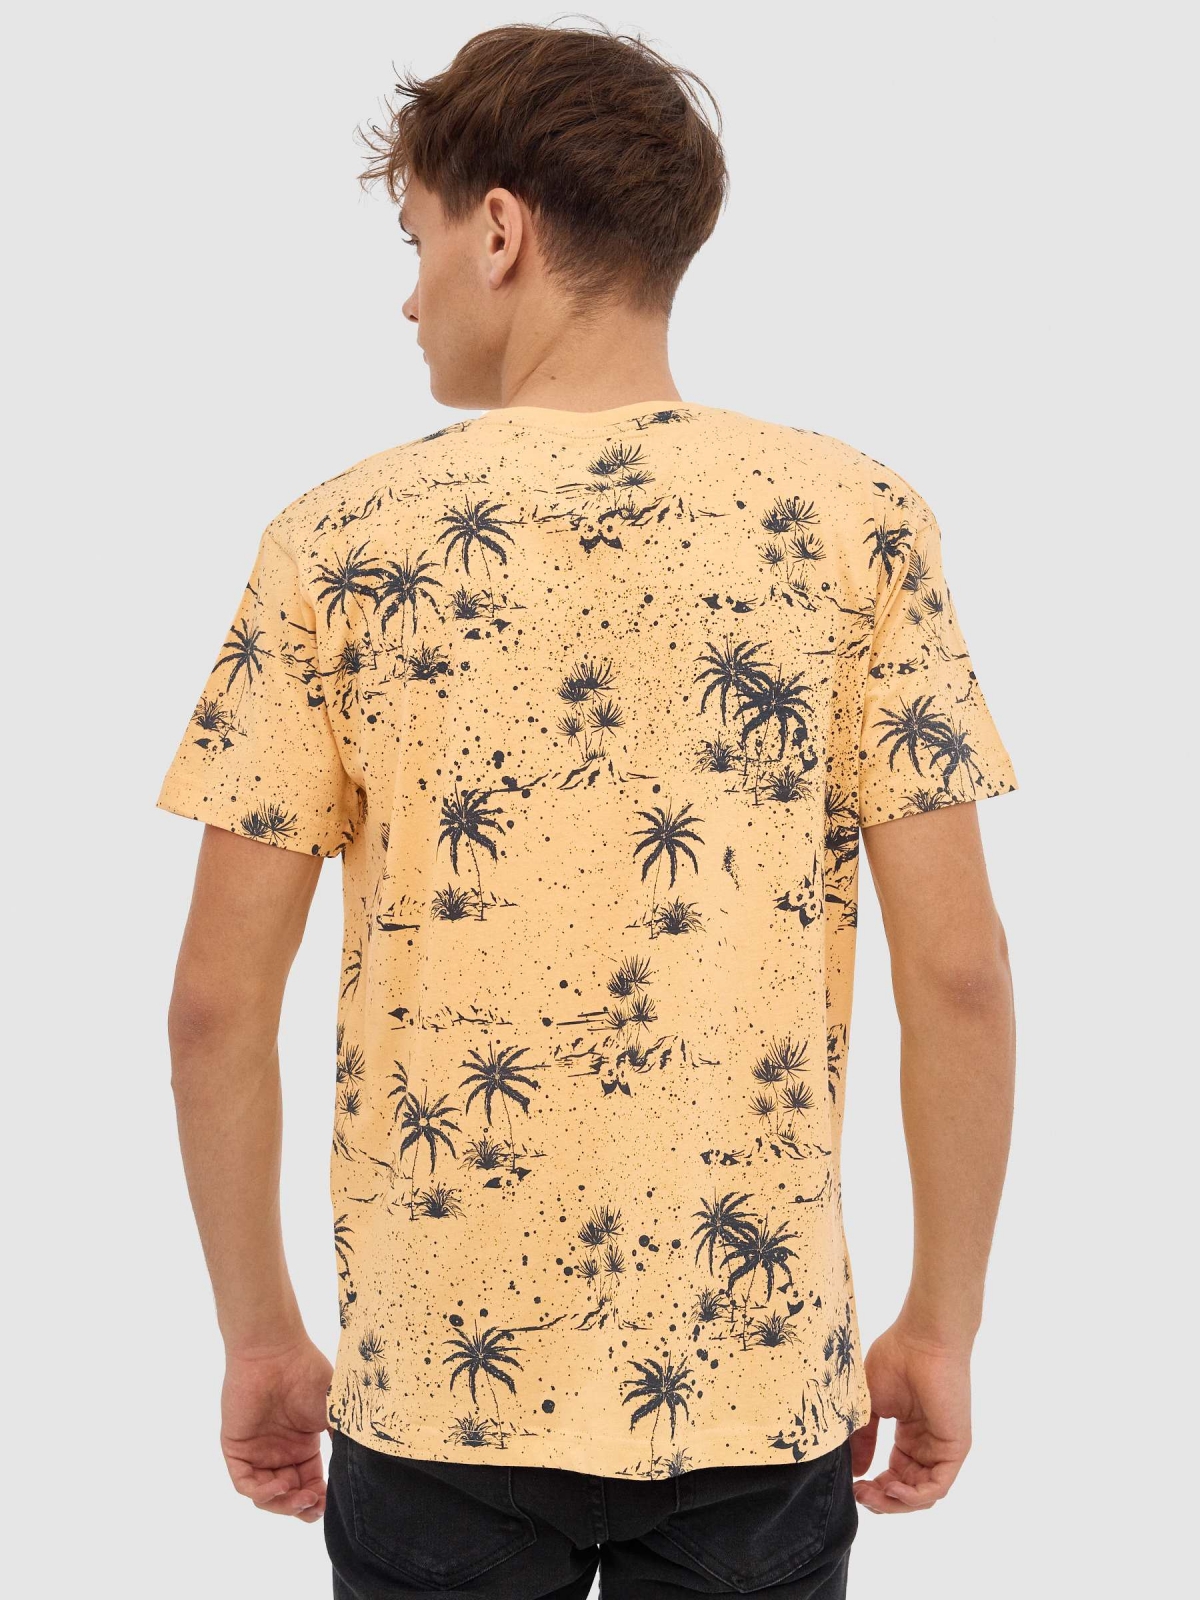 Palms T-shirt yellow middle back view